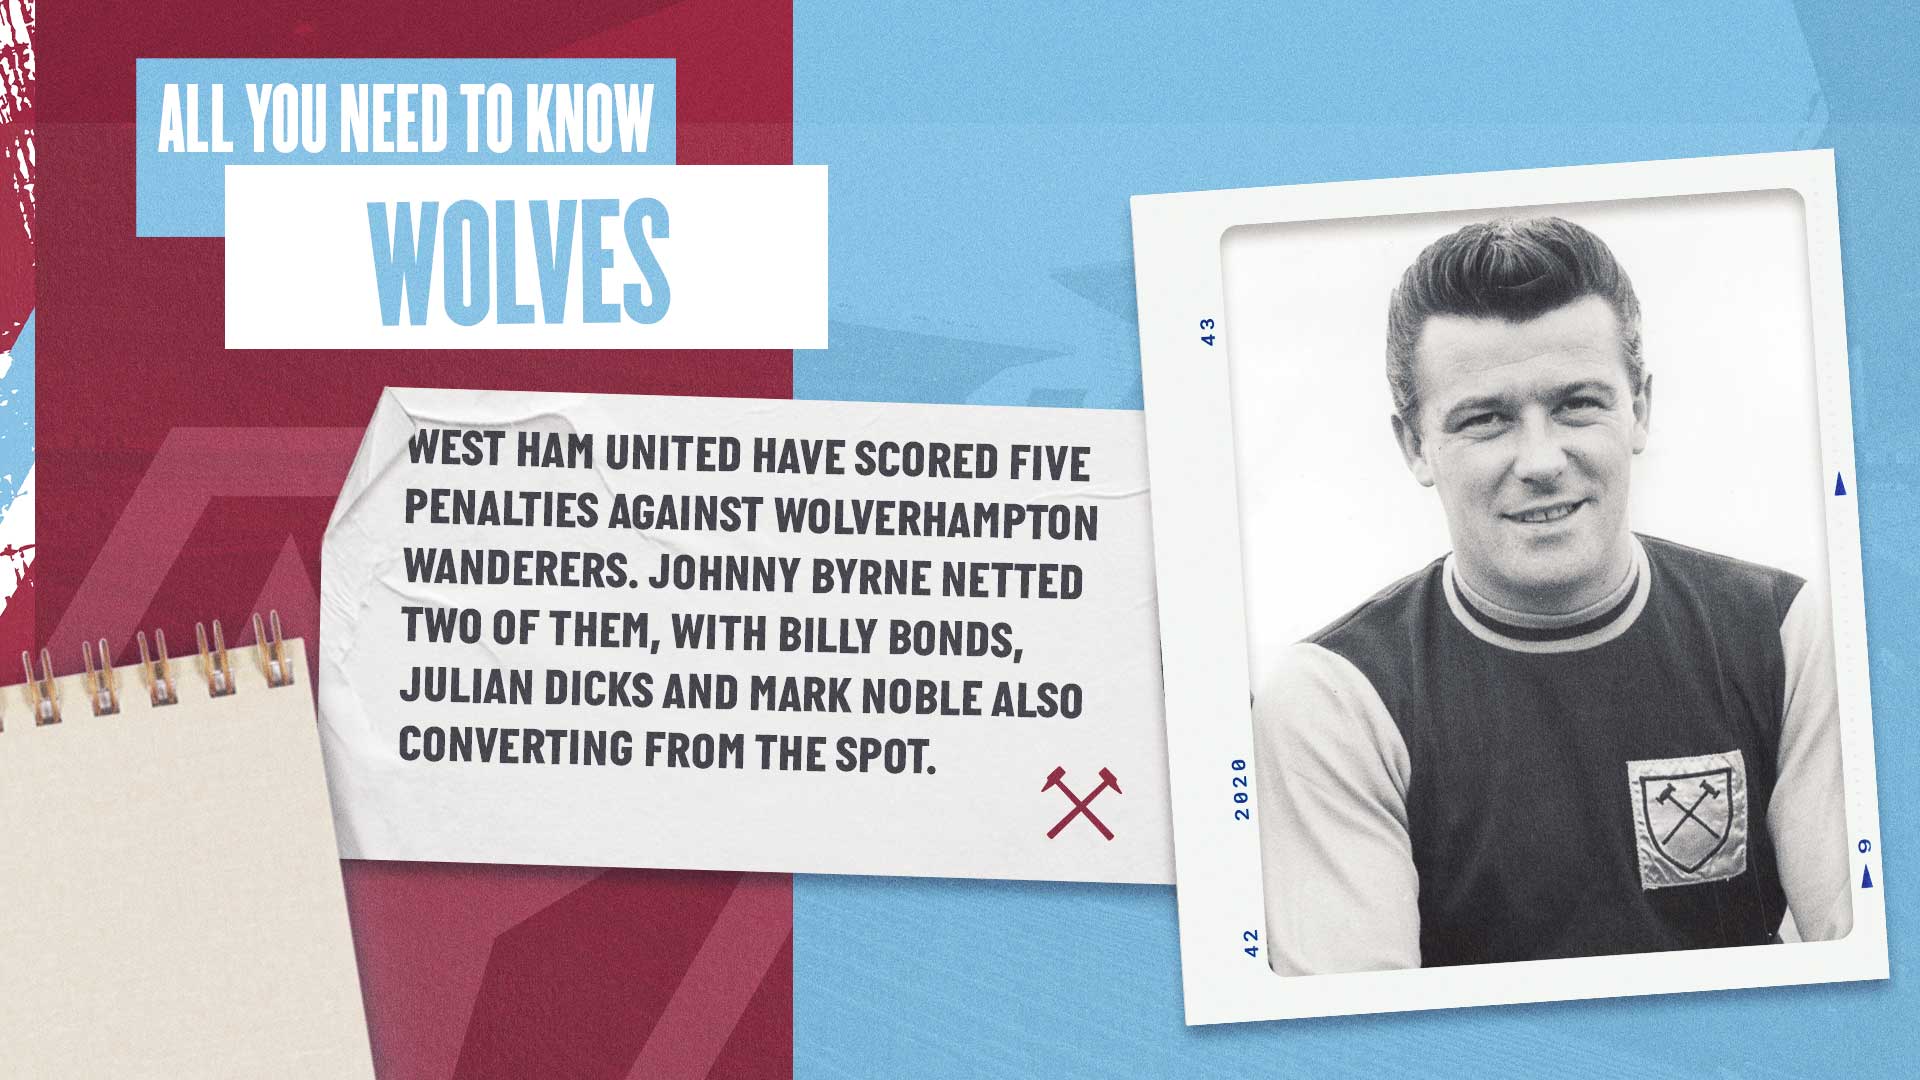 Wolves all you need to know fact 3